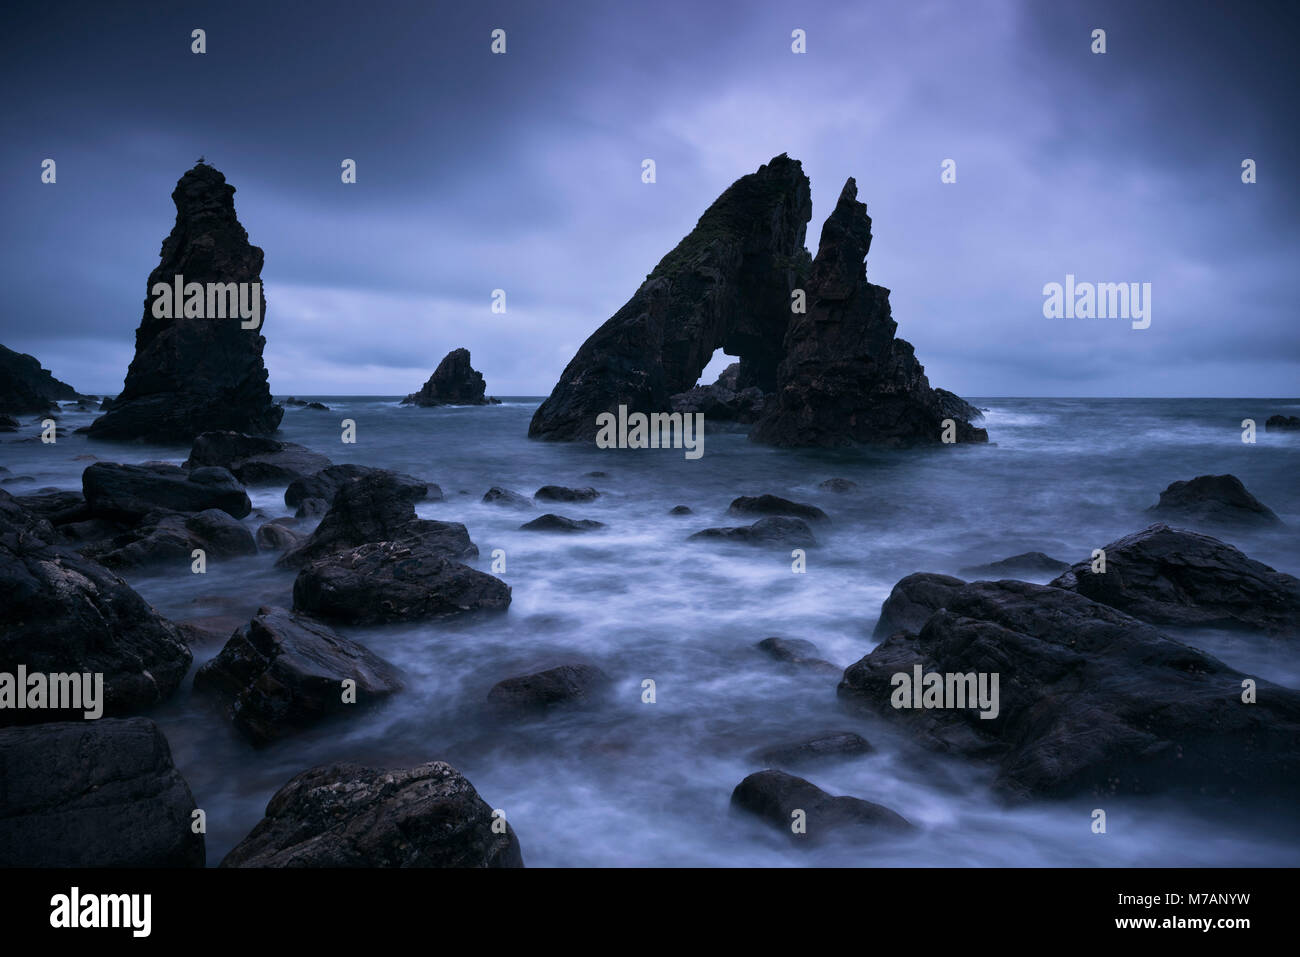 Rock formations 'The Breeches', Crohy Head, County Mayo, Ireland, daybreak, Blue Hour, Stock Photo